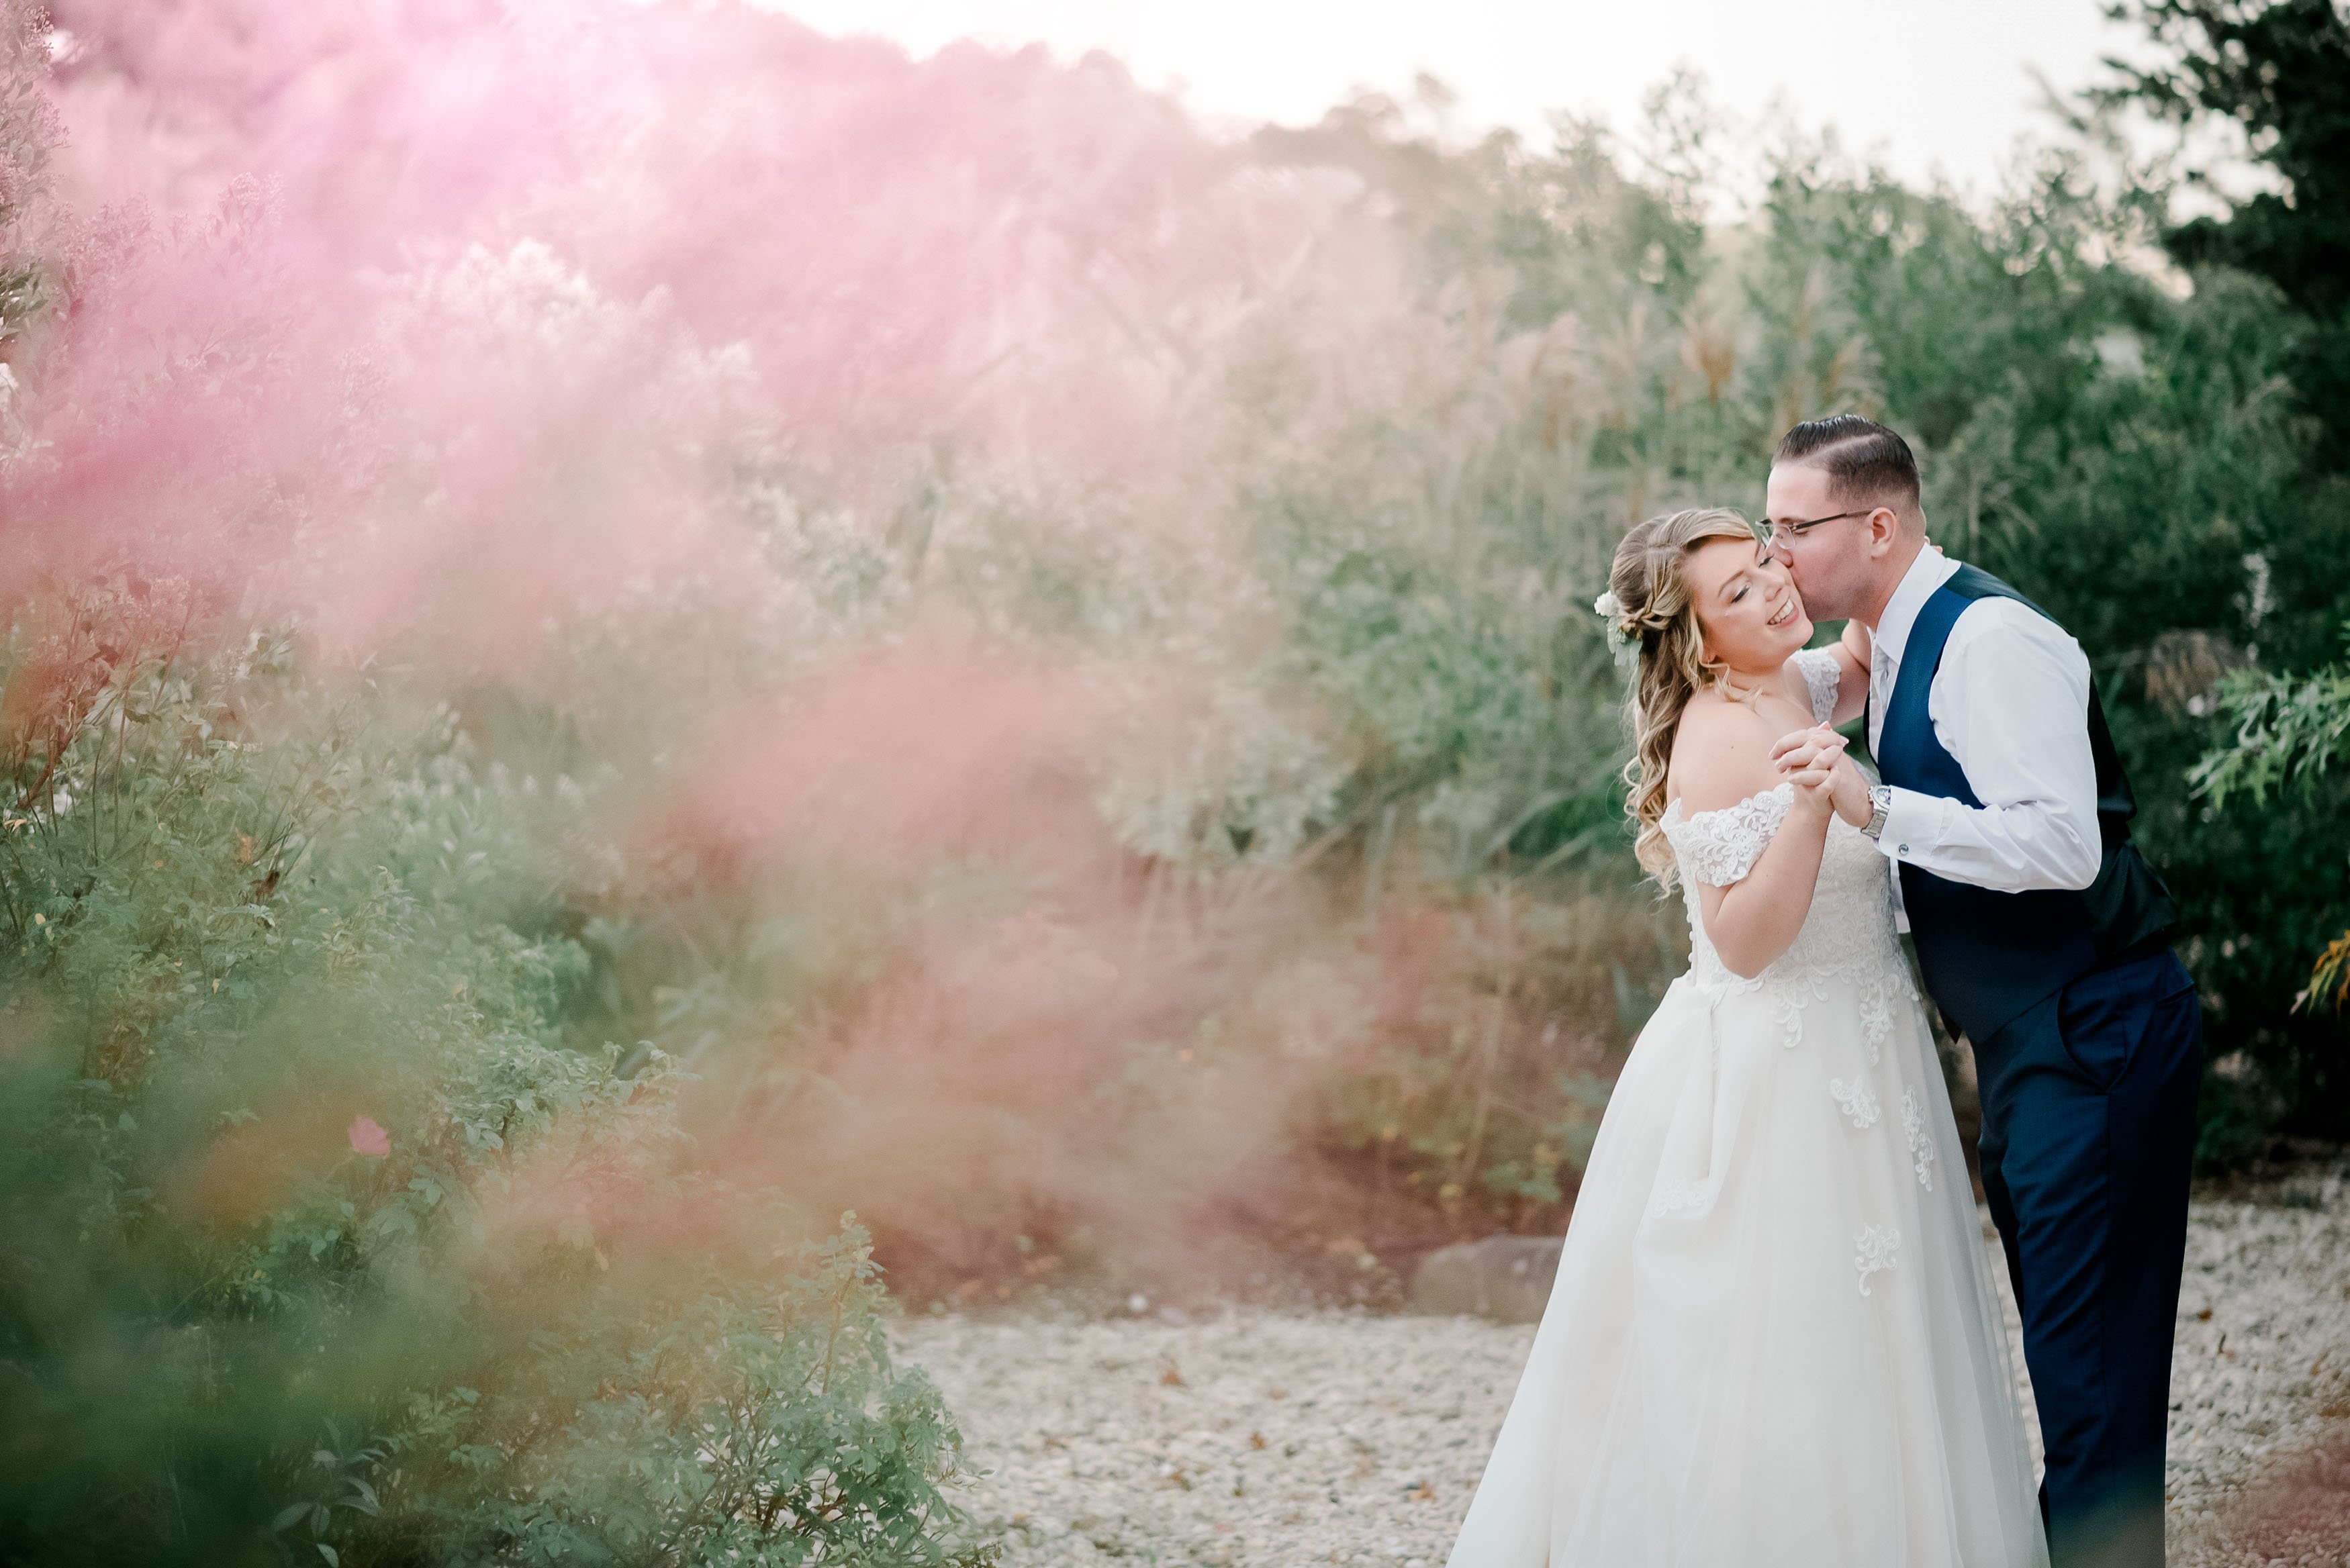 Old Field Club Wedding Photos - Light and Airy Wedding Pictures